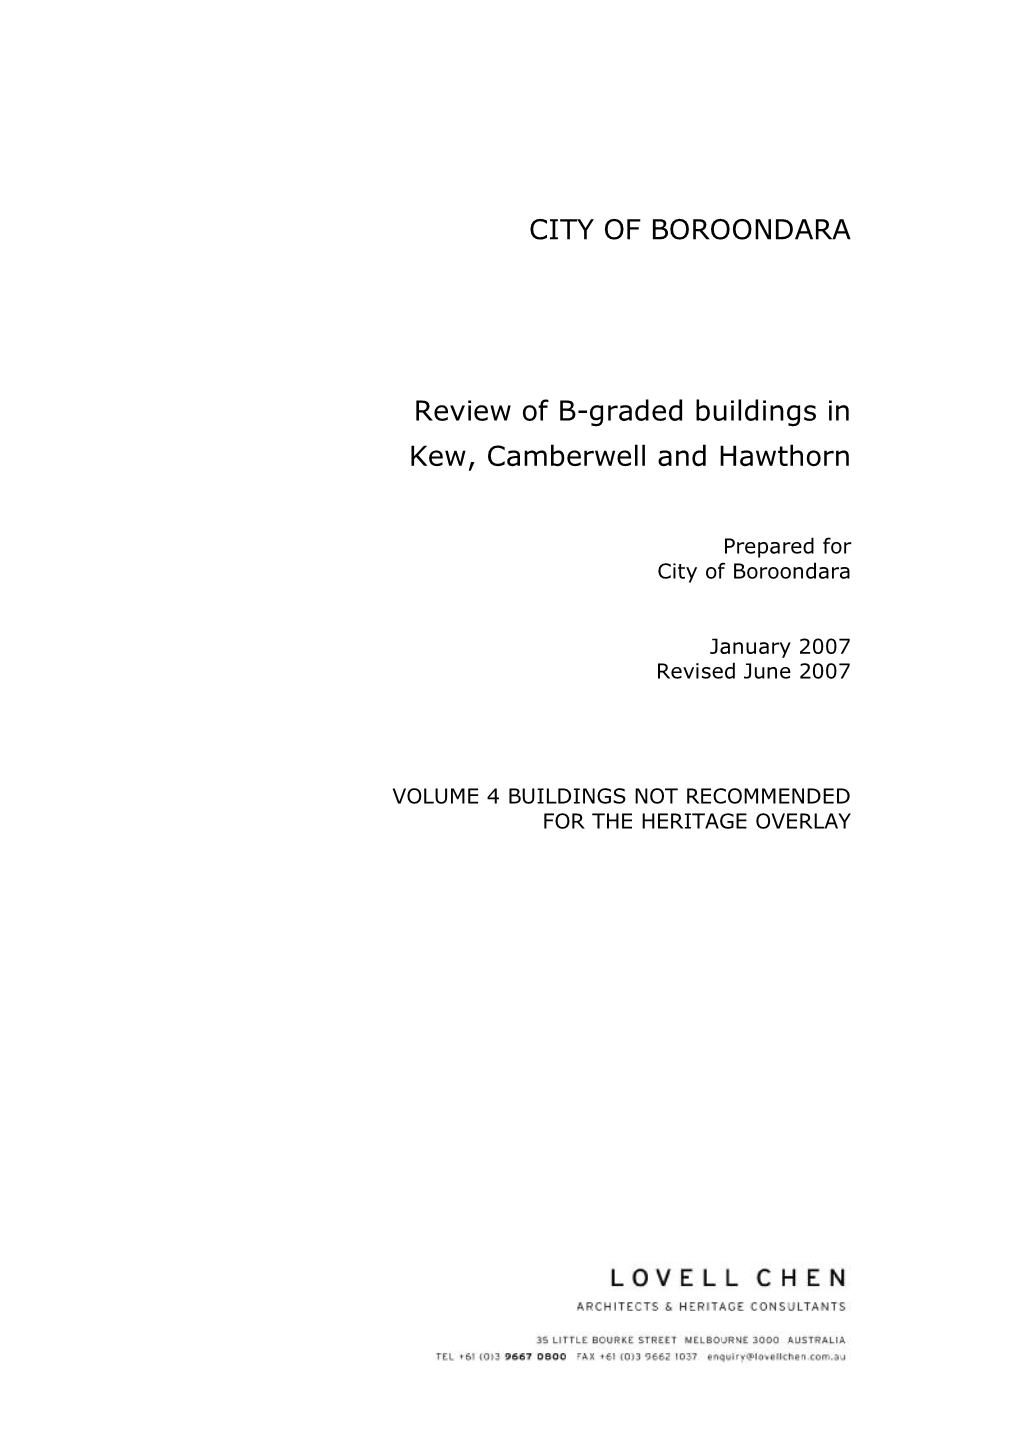 CITY of BOROONDARA Review of B-Graded Buildings in Kew, Camberwell and Hawthorn